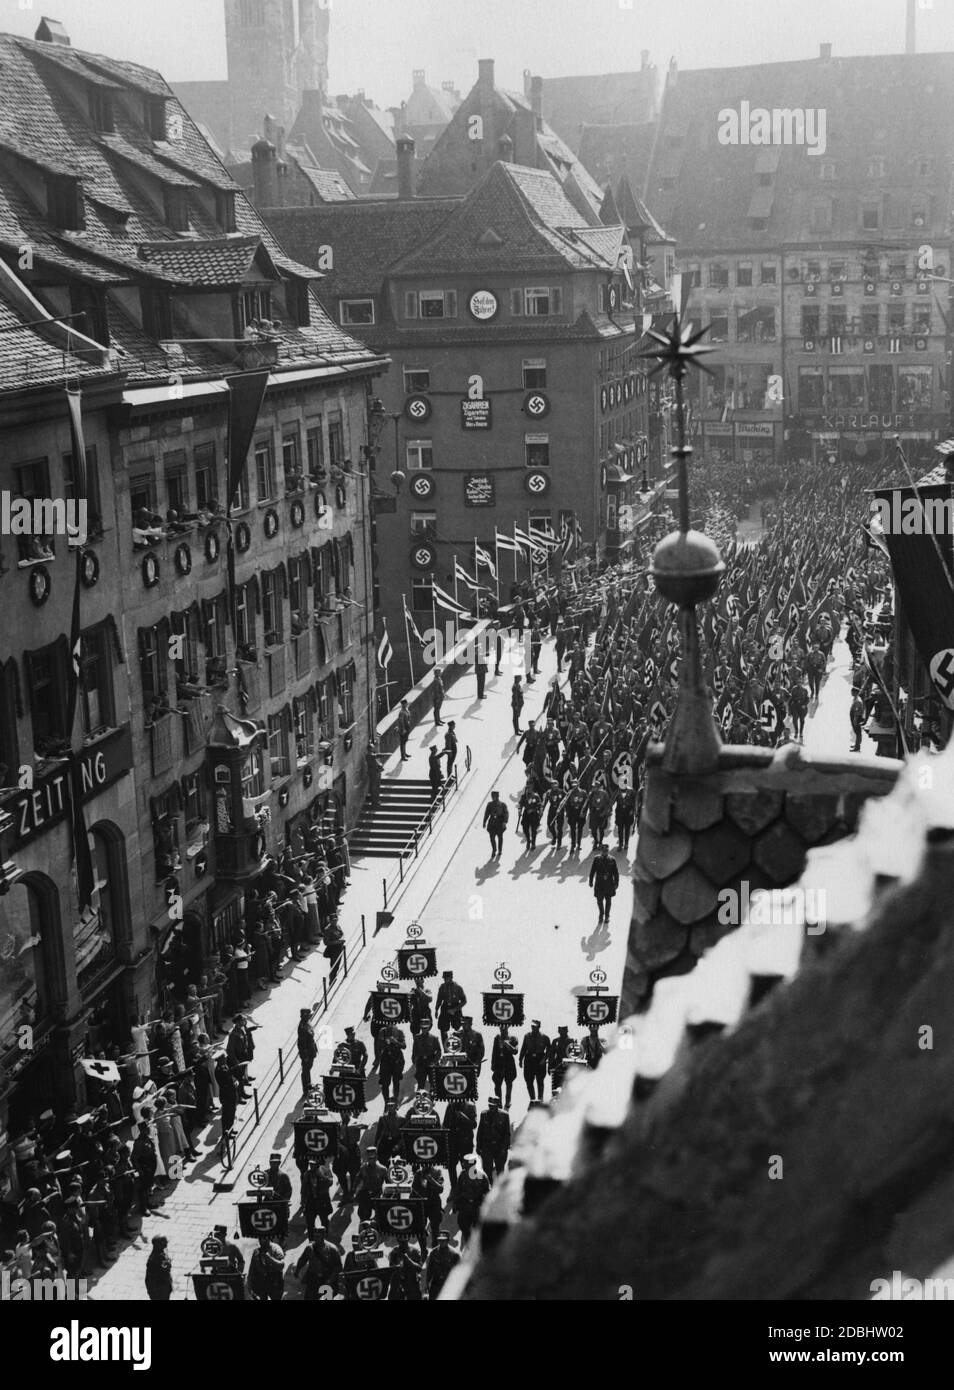 'SA units march across the Fleisch Bridge on their way to the so-called Adolf-Hitler-Platz. On the building on the other side of the bridge on the left side there are several swastikas and a sign saying ''Heil dem Fuehrer!'' (''Hail to the Fuehrer'').  On the lower left, amidst the spectators, there are several nurses.' Stock Photo